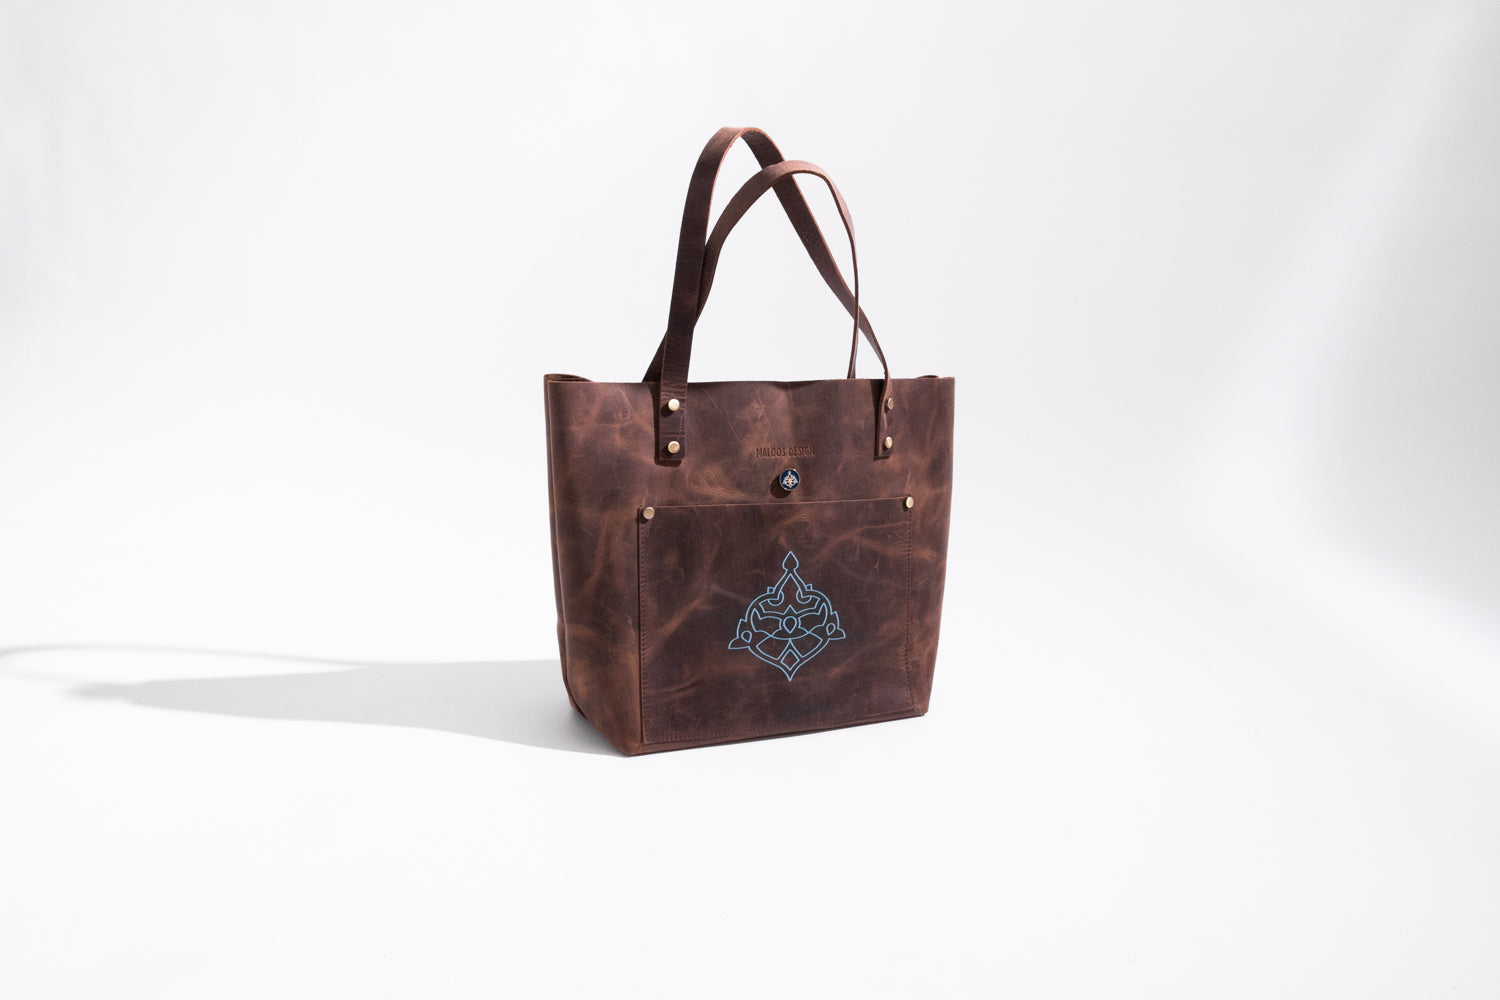 RAHEA, Tote Bags+ a FREE silk matched scarf – Maloos Design